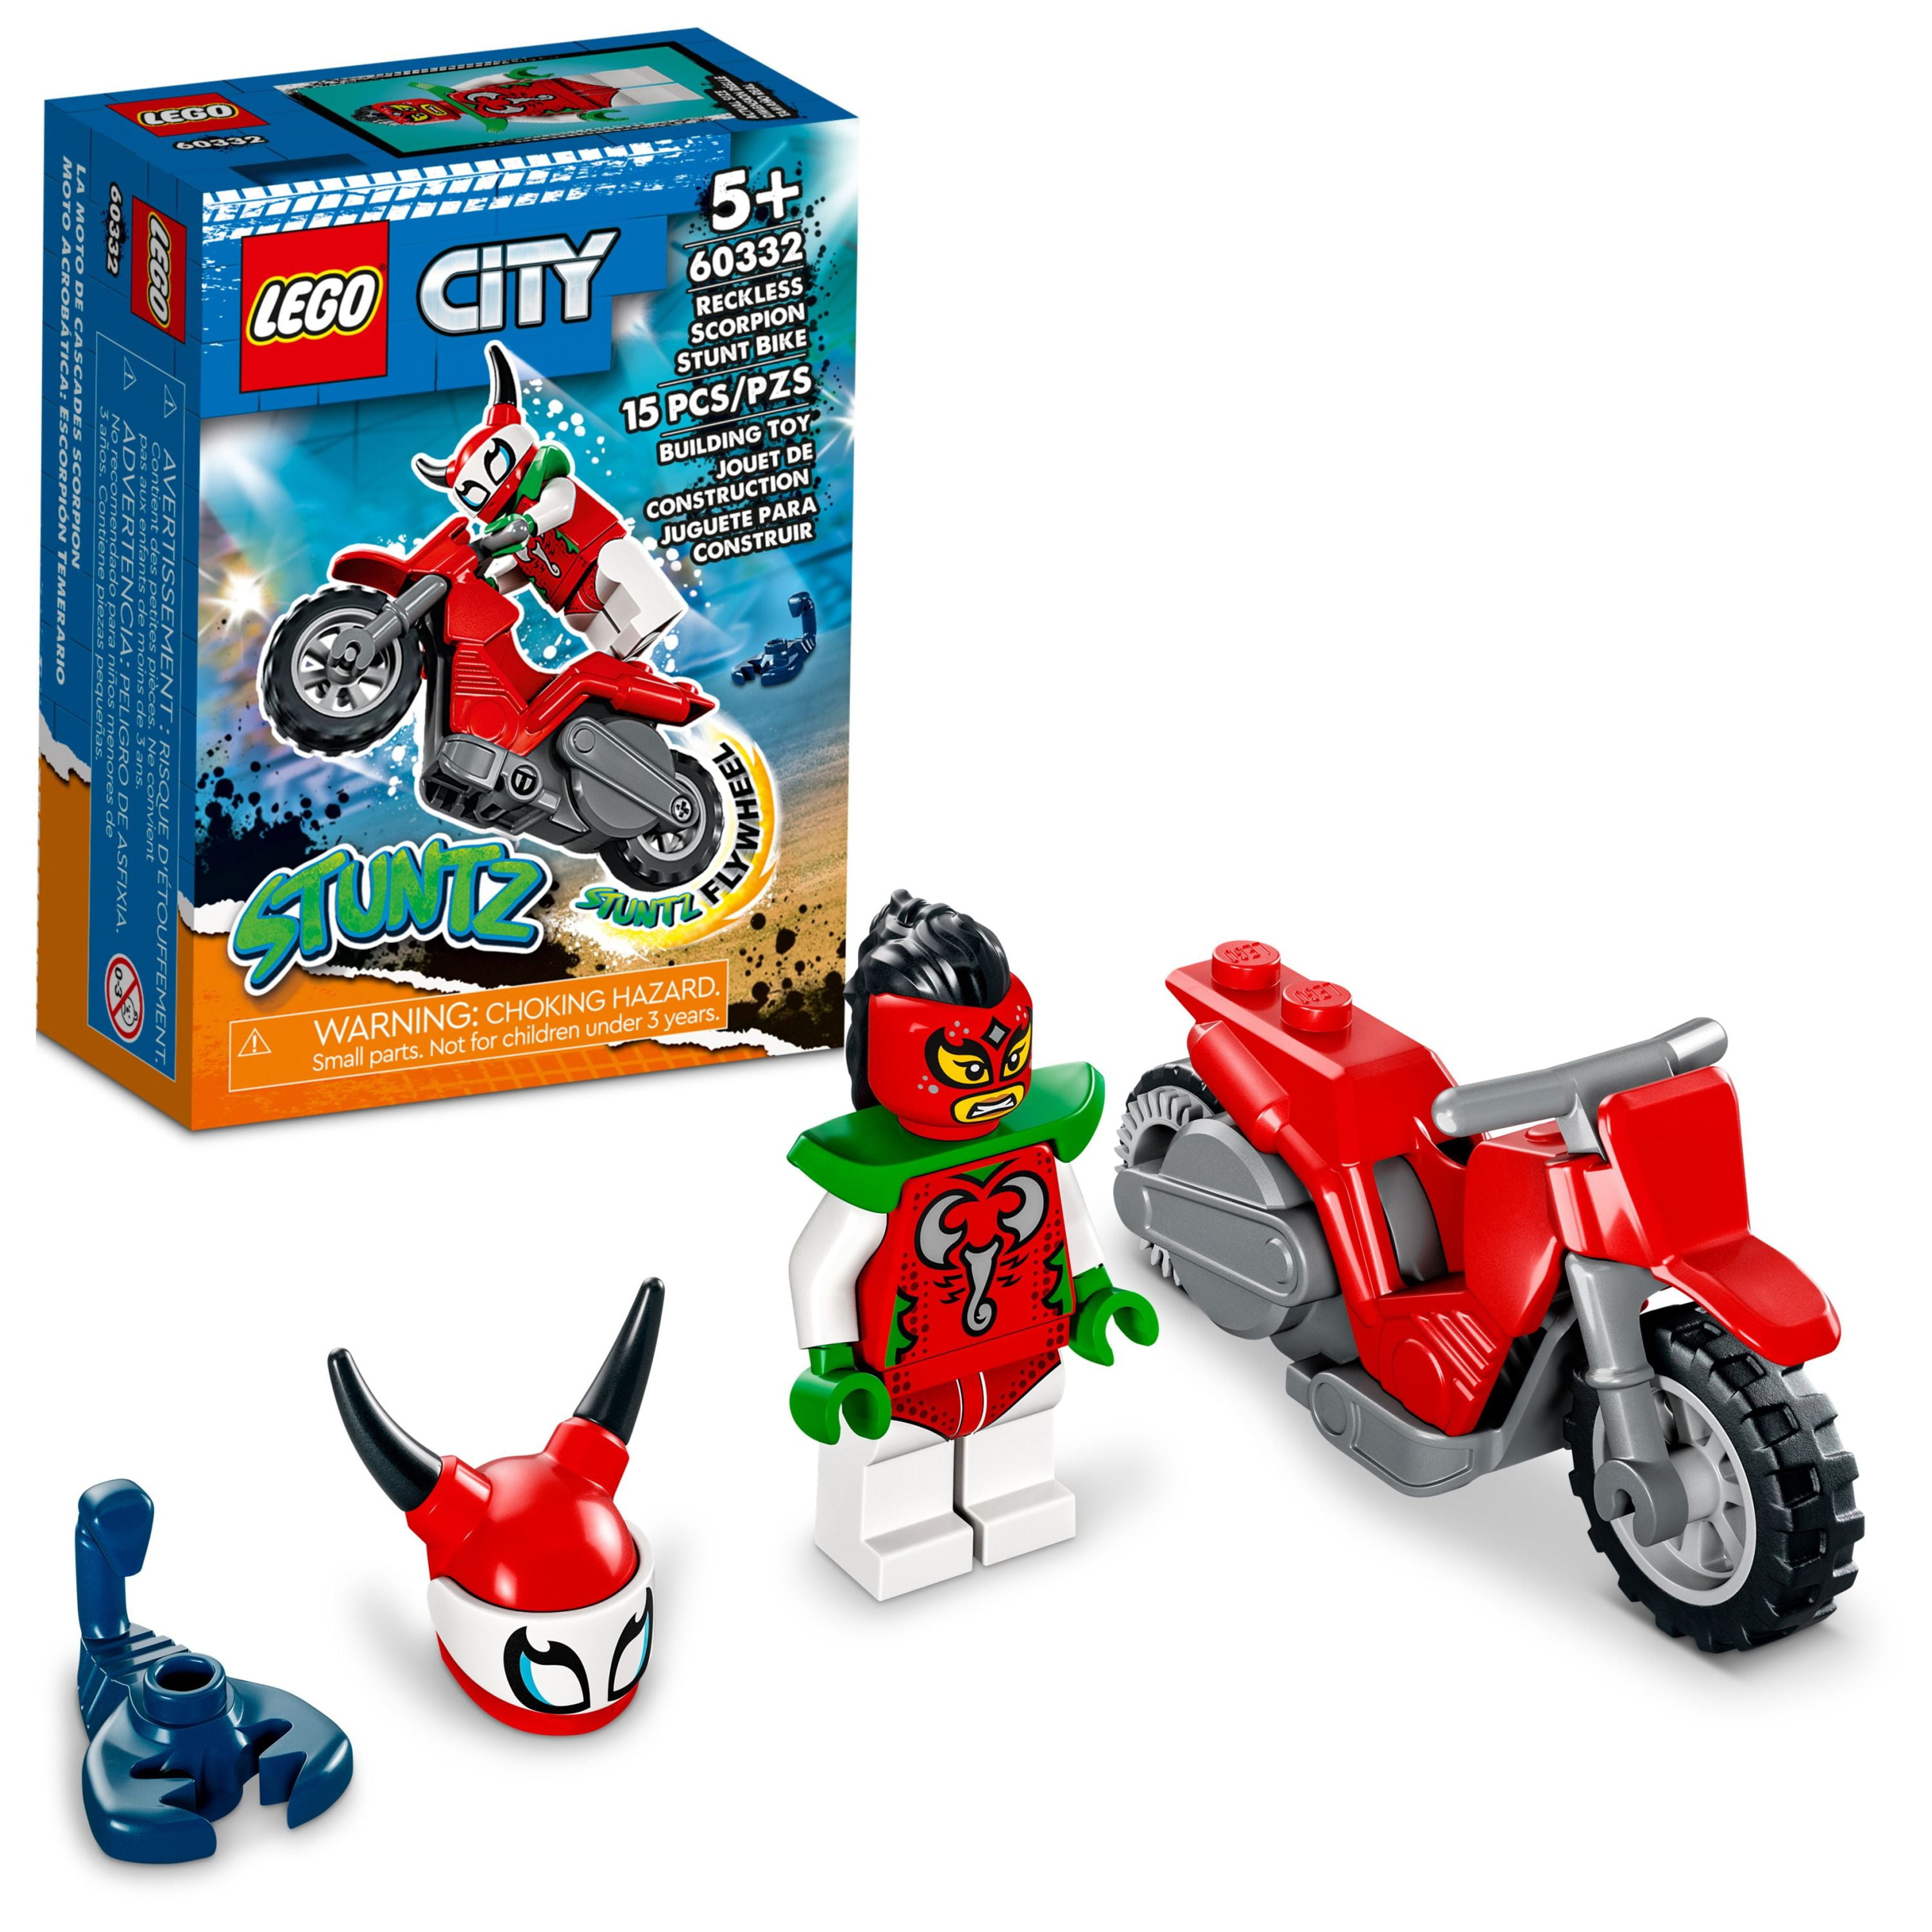 LEGO City Stuntz Reckless Scorpion Stunt Bike Set 60332 with Flywheel-Powered Toy Motorcycle and Racer Minifigure, Small Gift for Kids Aged 5 Plus